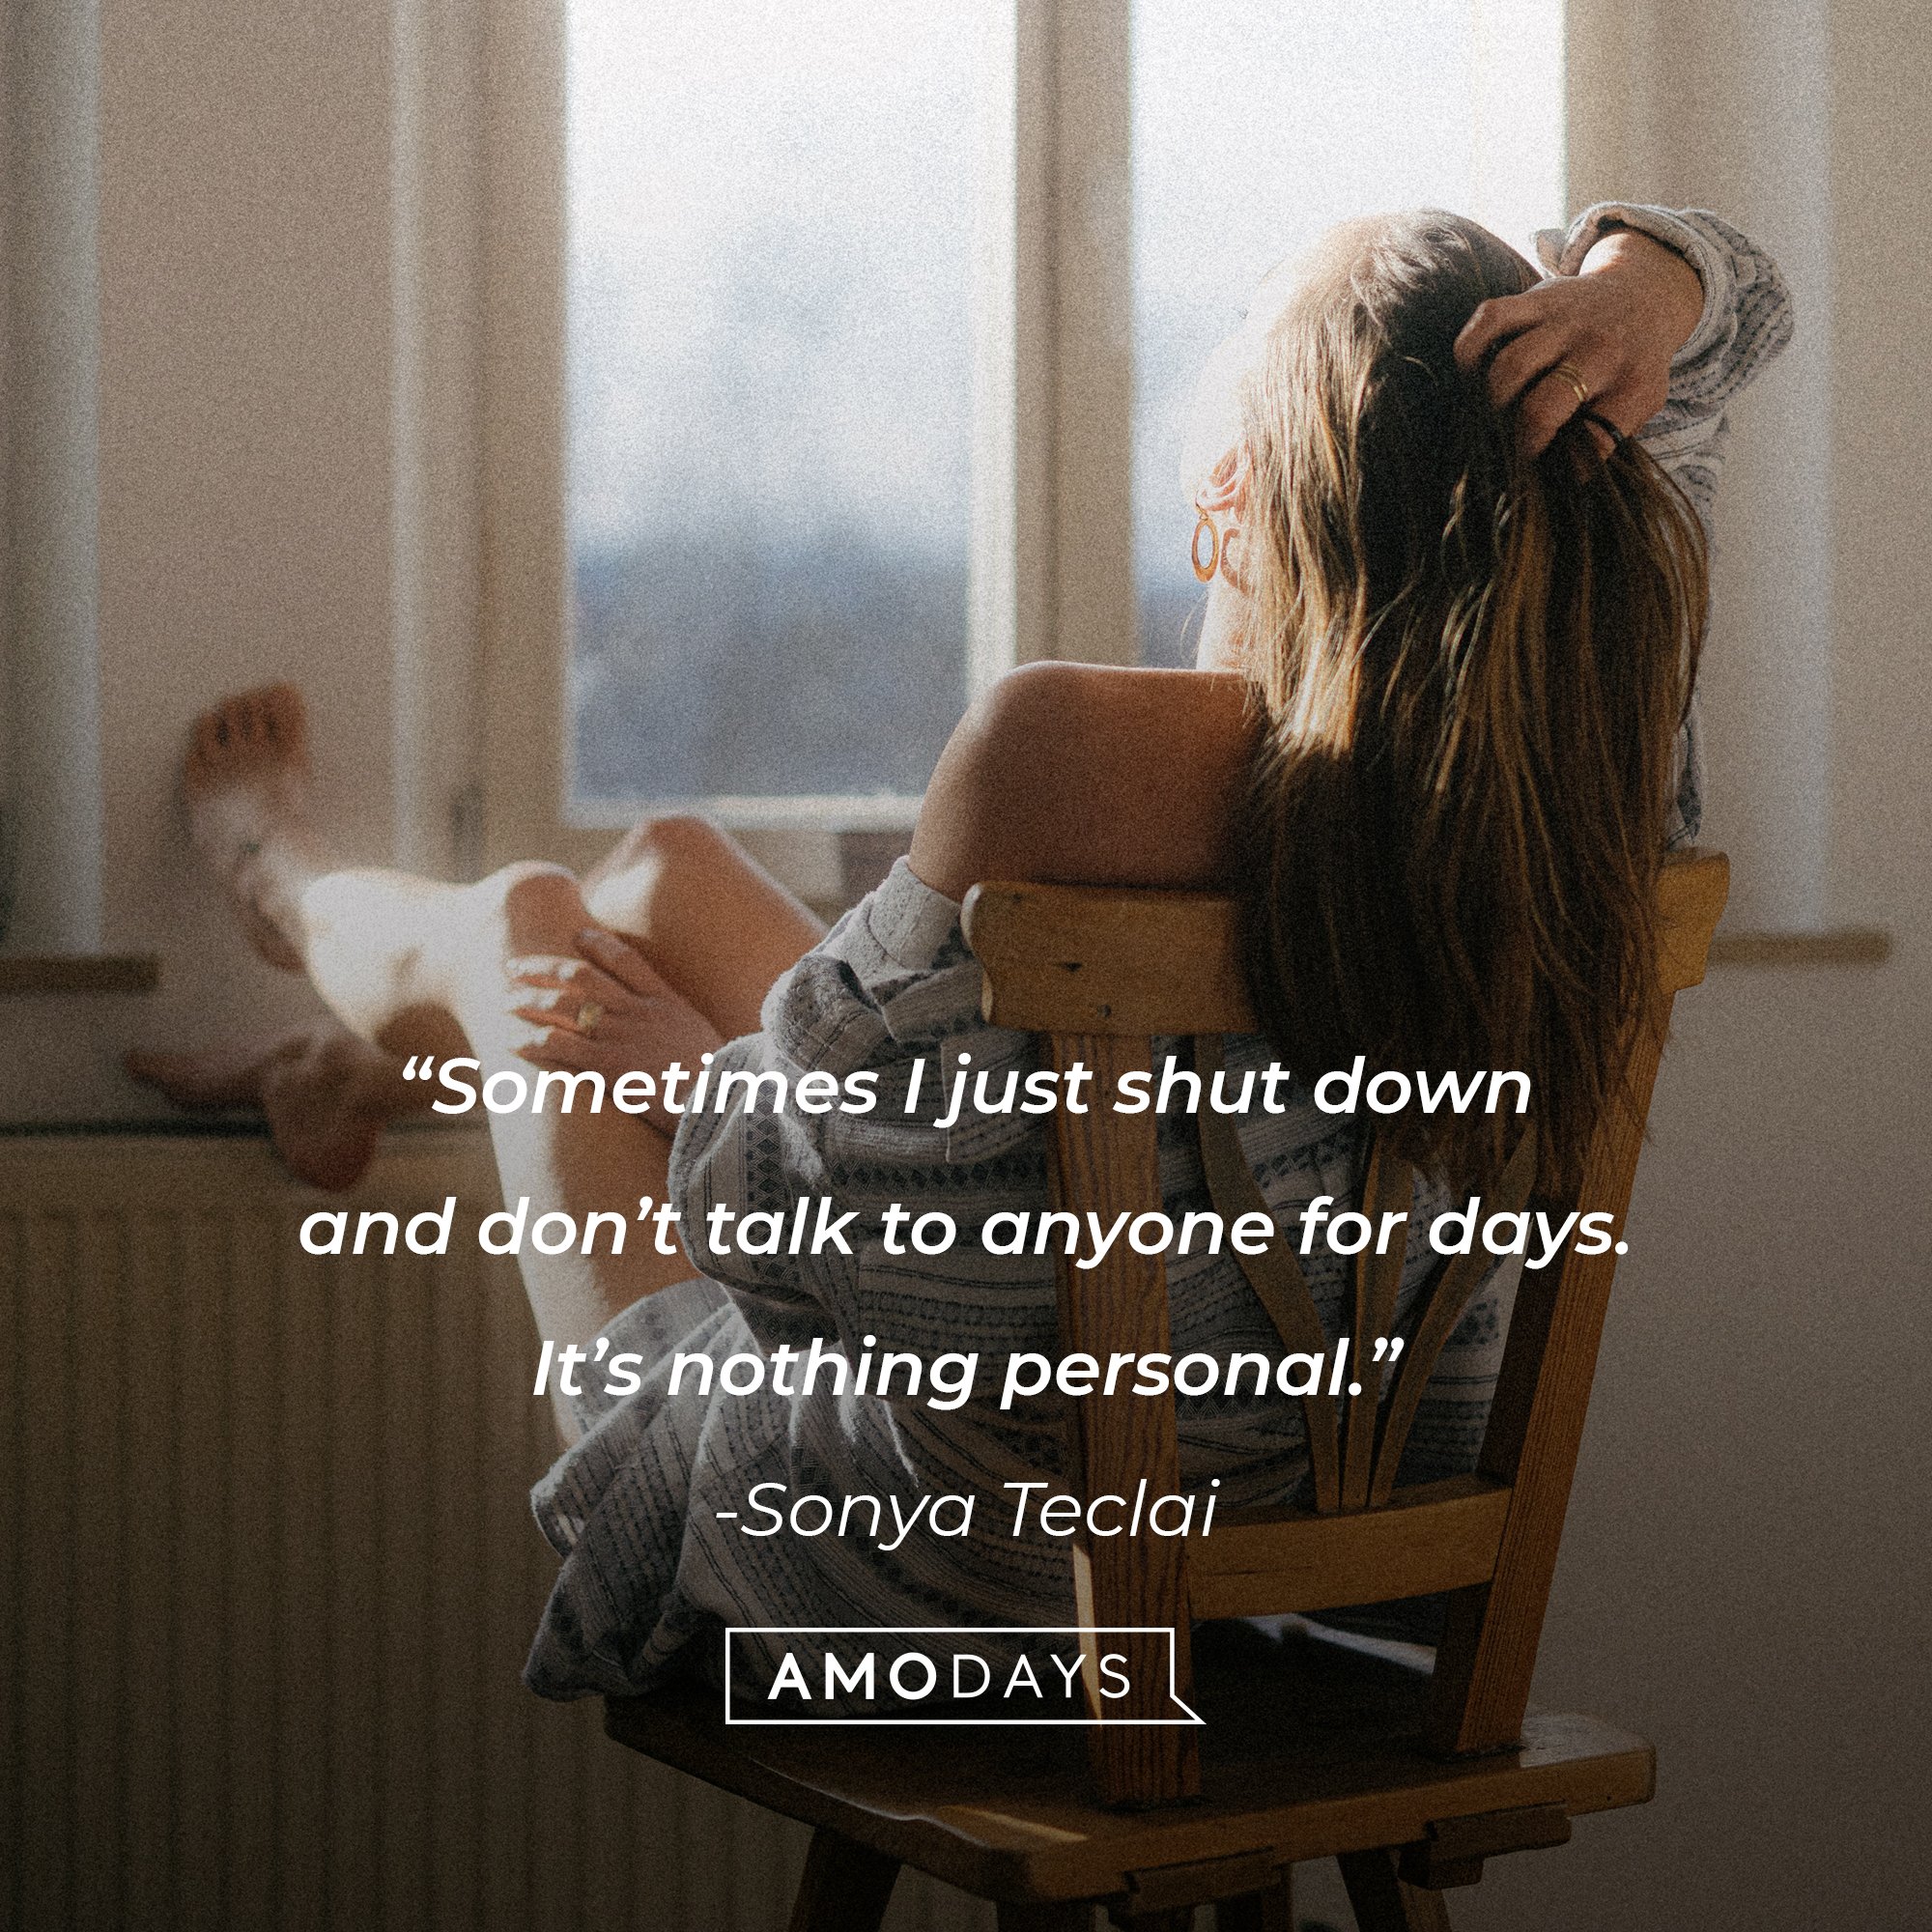 Sonya Teclai's quote: “Sometimes I just shut down and don’t talk to anyone for days. It’s nothing personal.” | Image: AmoDays